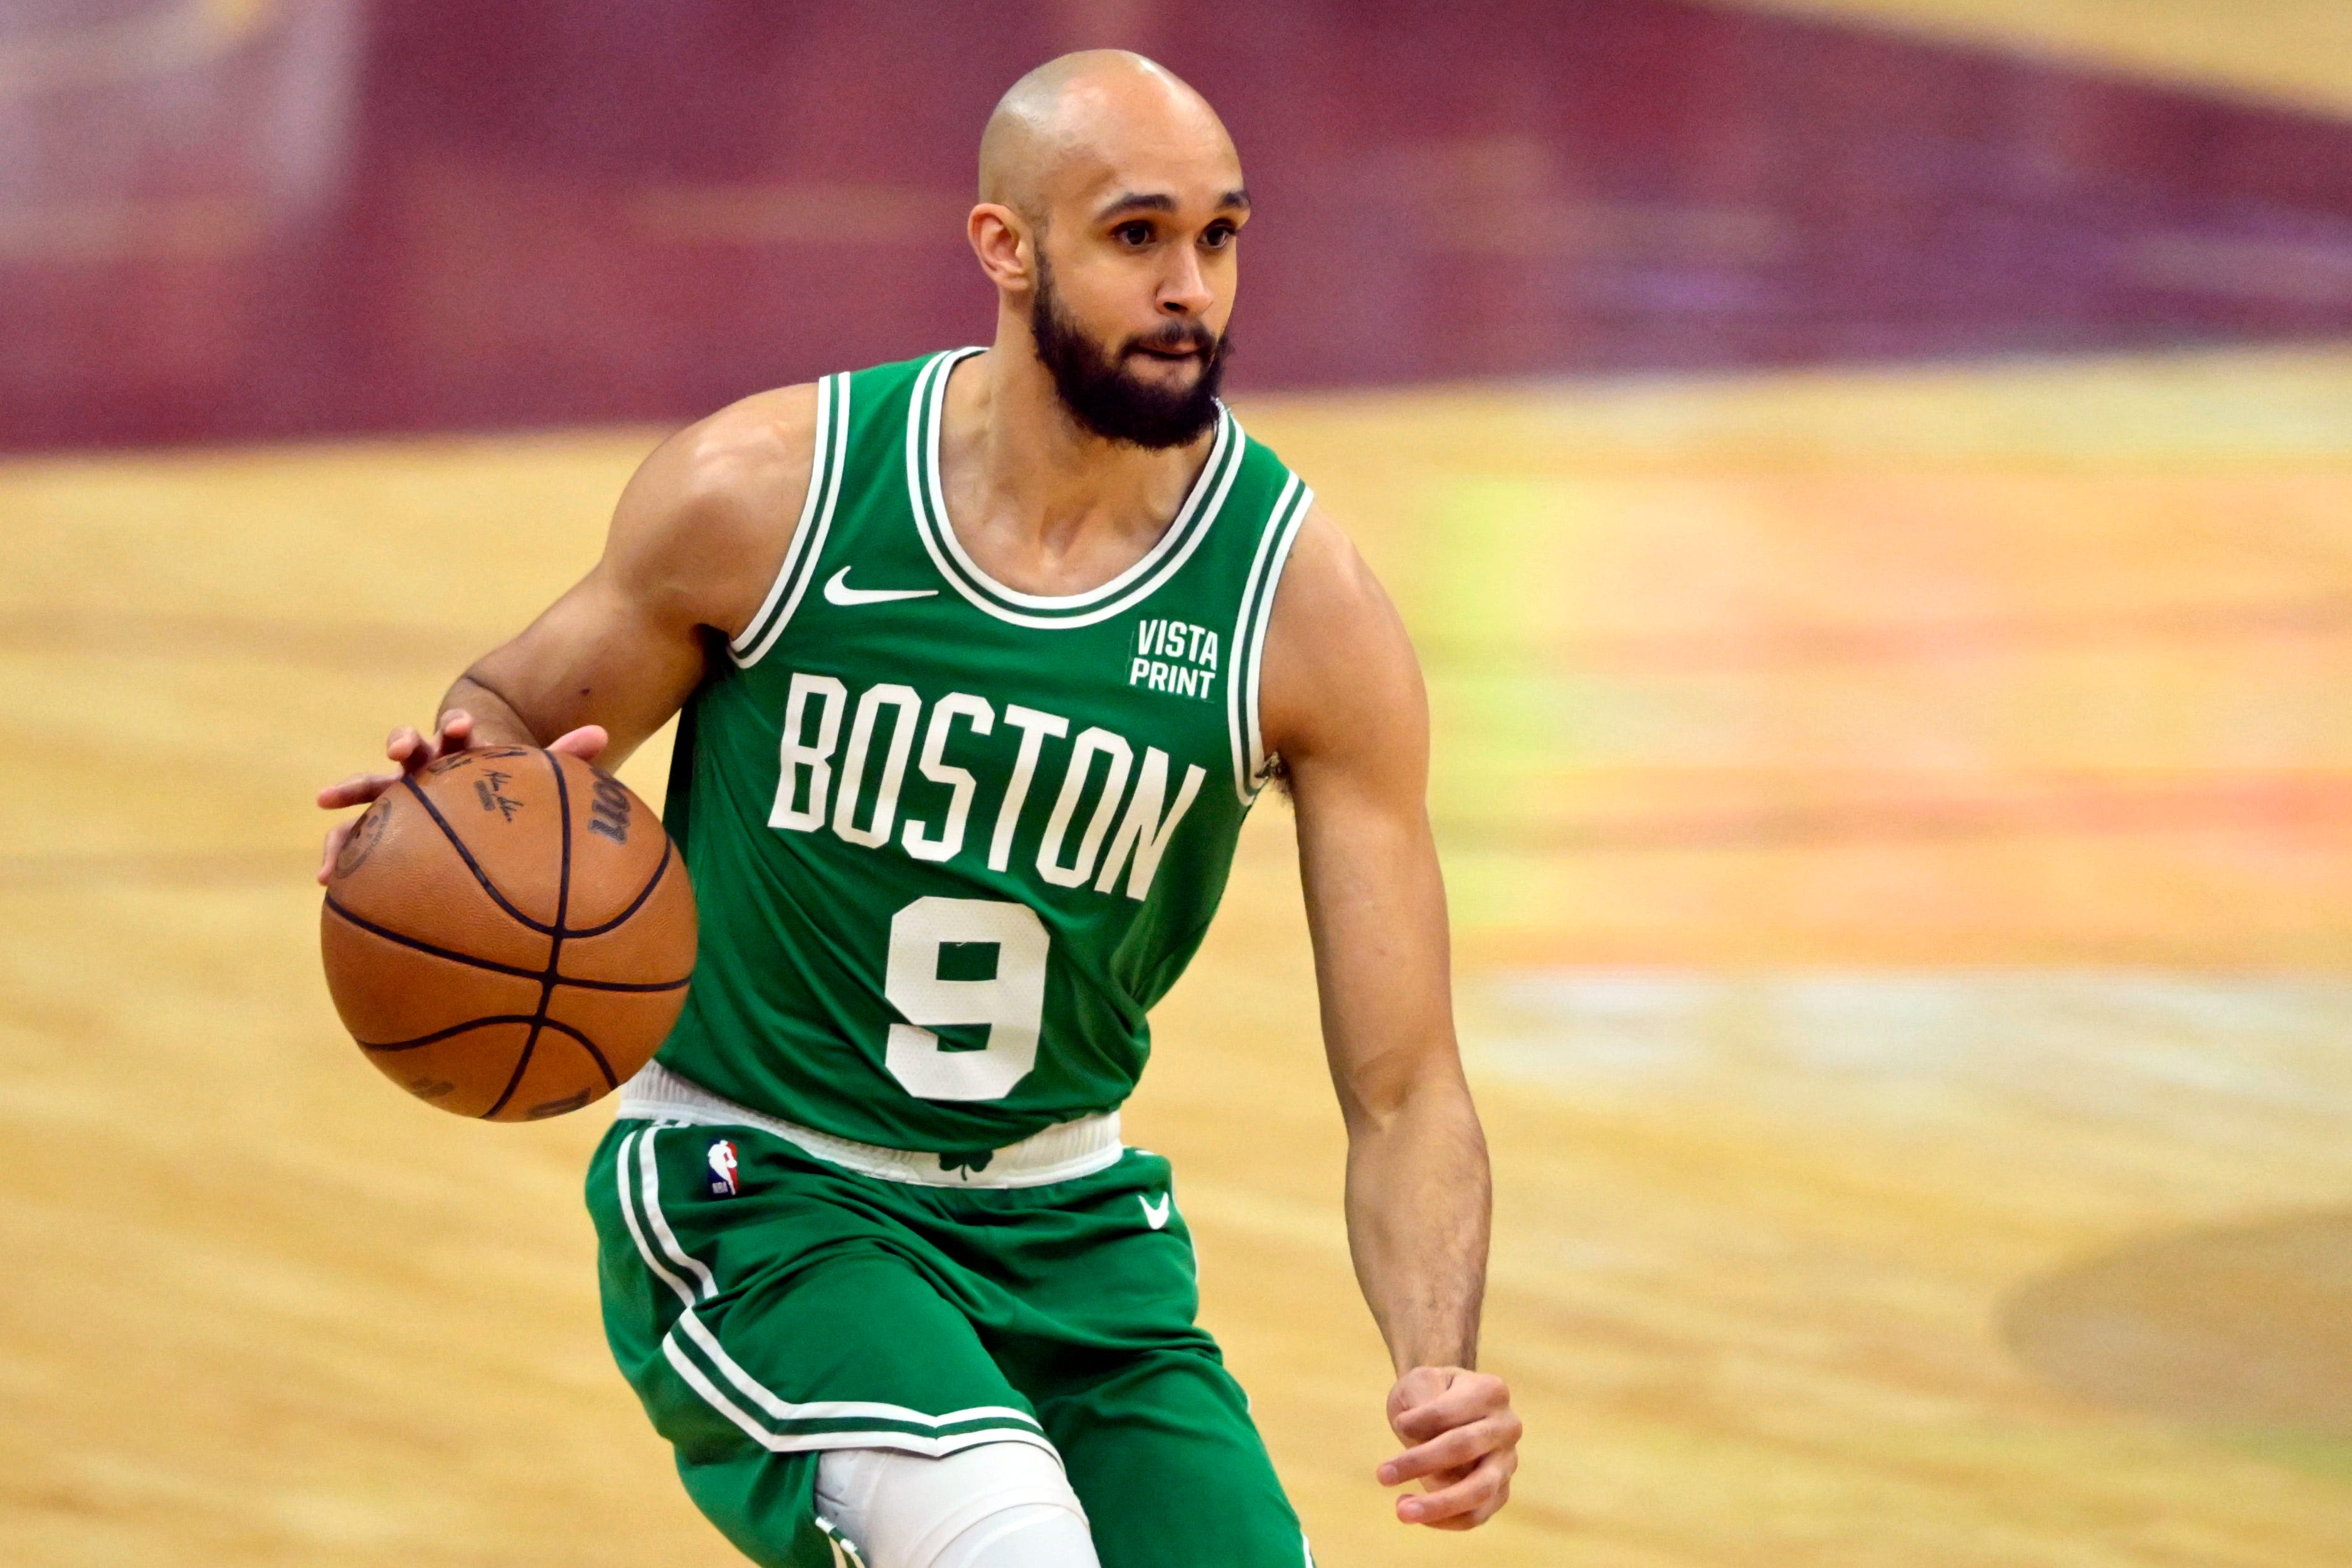 Another Celtics star is heading to the Olympics, but it may not be the one you think